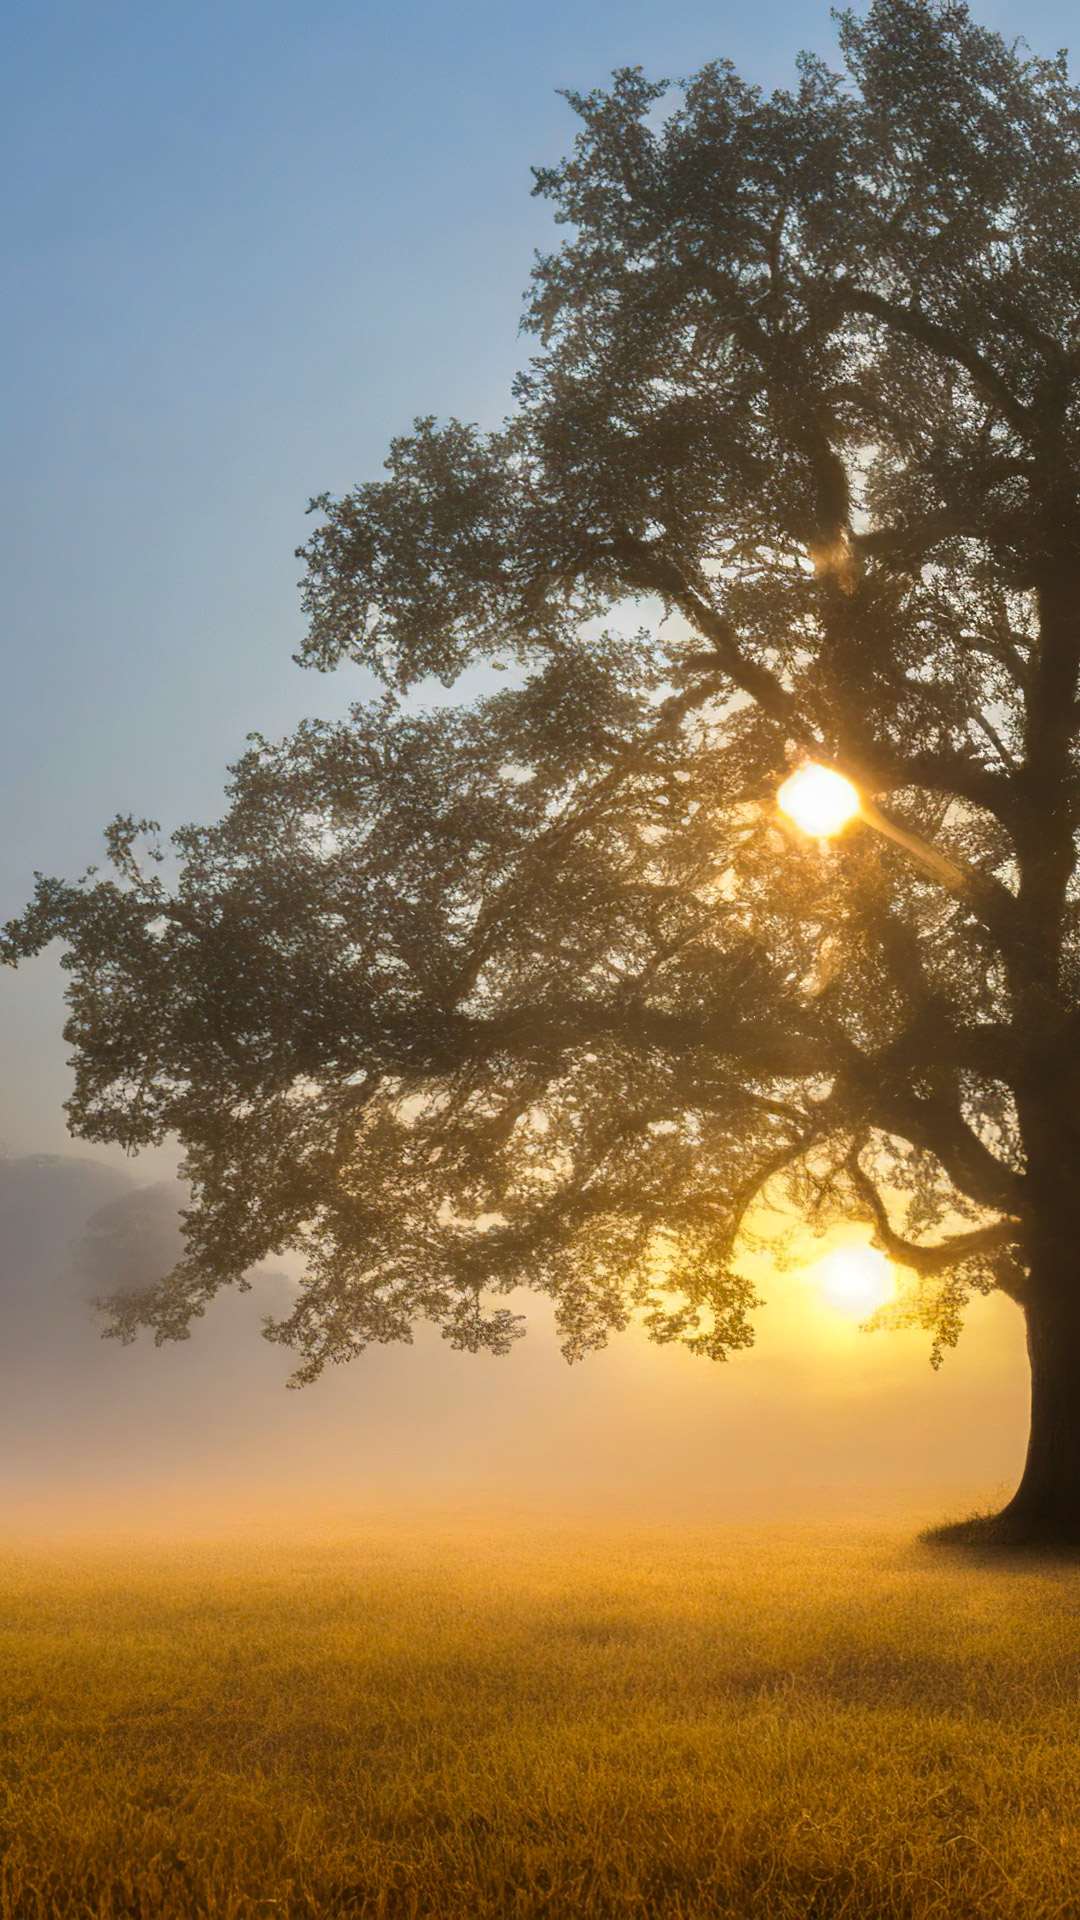 Get a taste of the outdoors with high-resolution nature background, capturing a majestic oak tree standing alone in a misty field, with a backdrop of the rising sun.